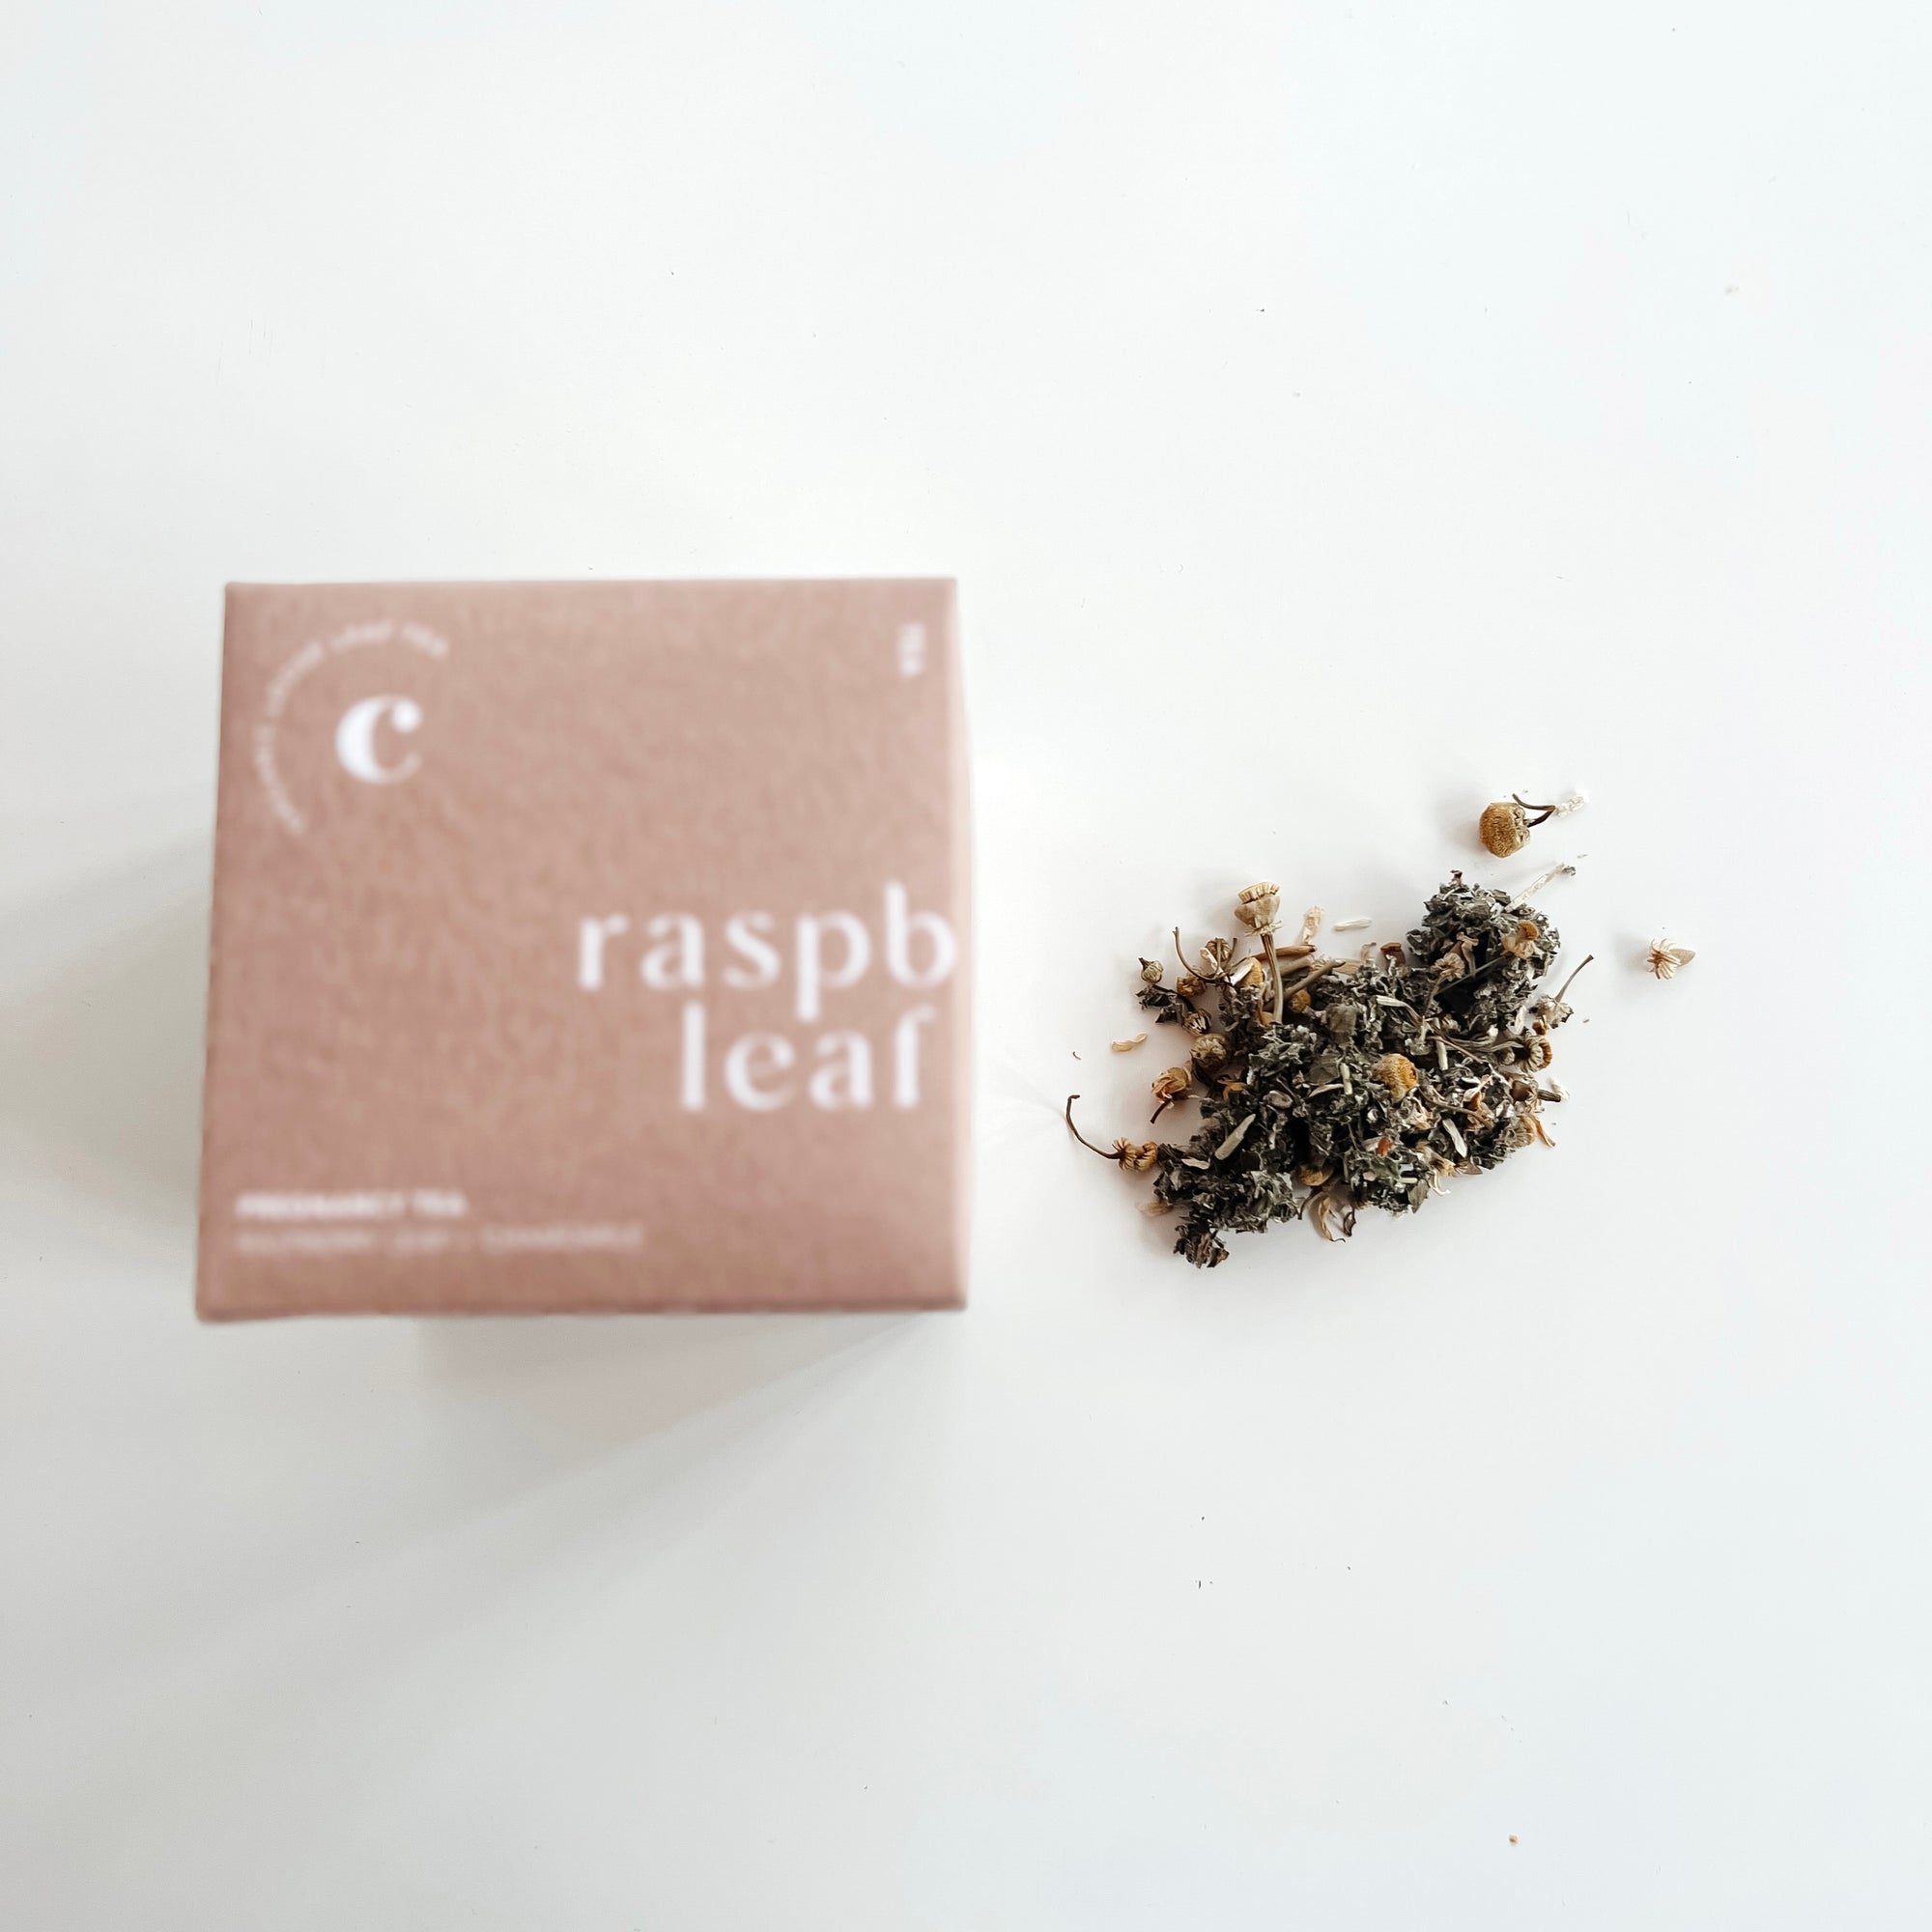 A box of Clē Naturals certified organic Raspberry Leaf Tea next to a pile of dried raspberry leaves on a white background.